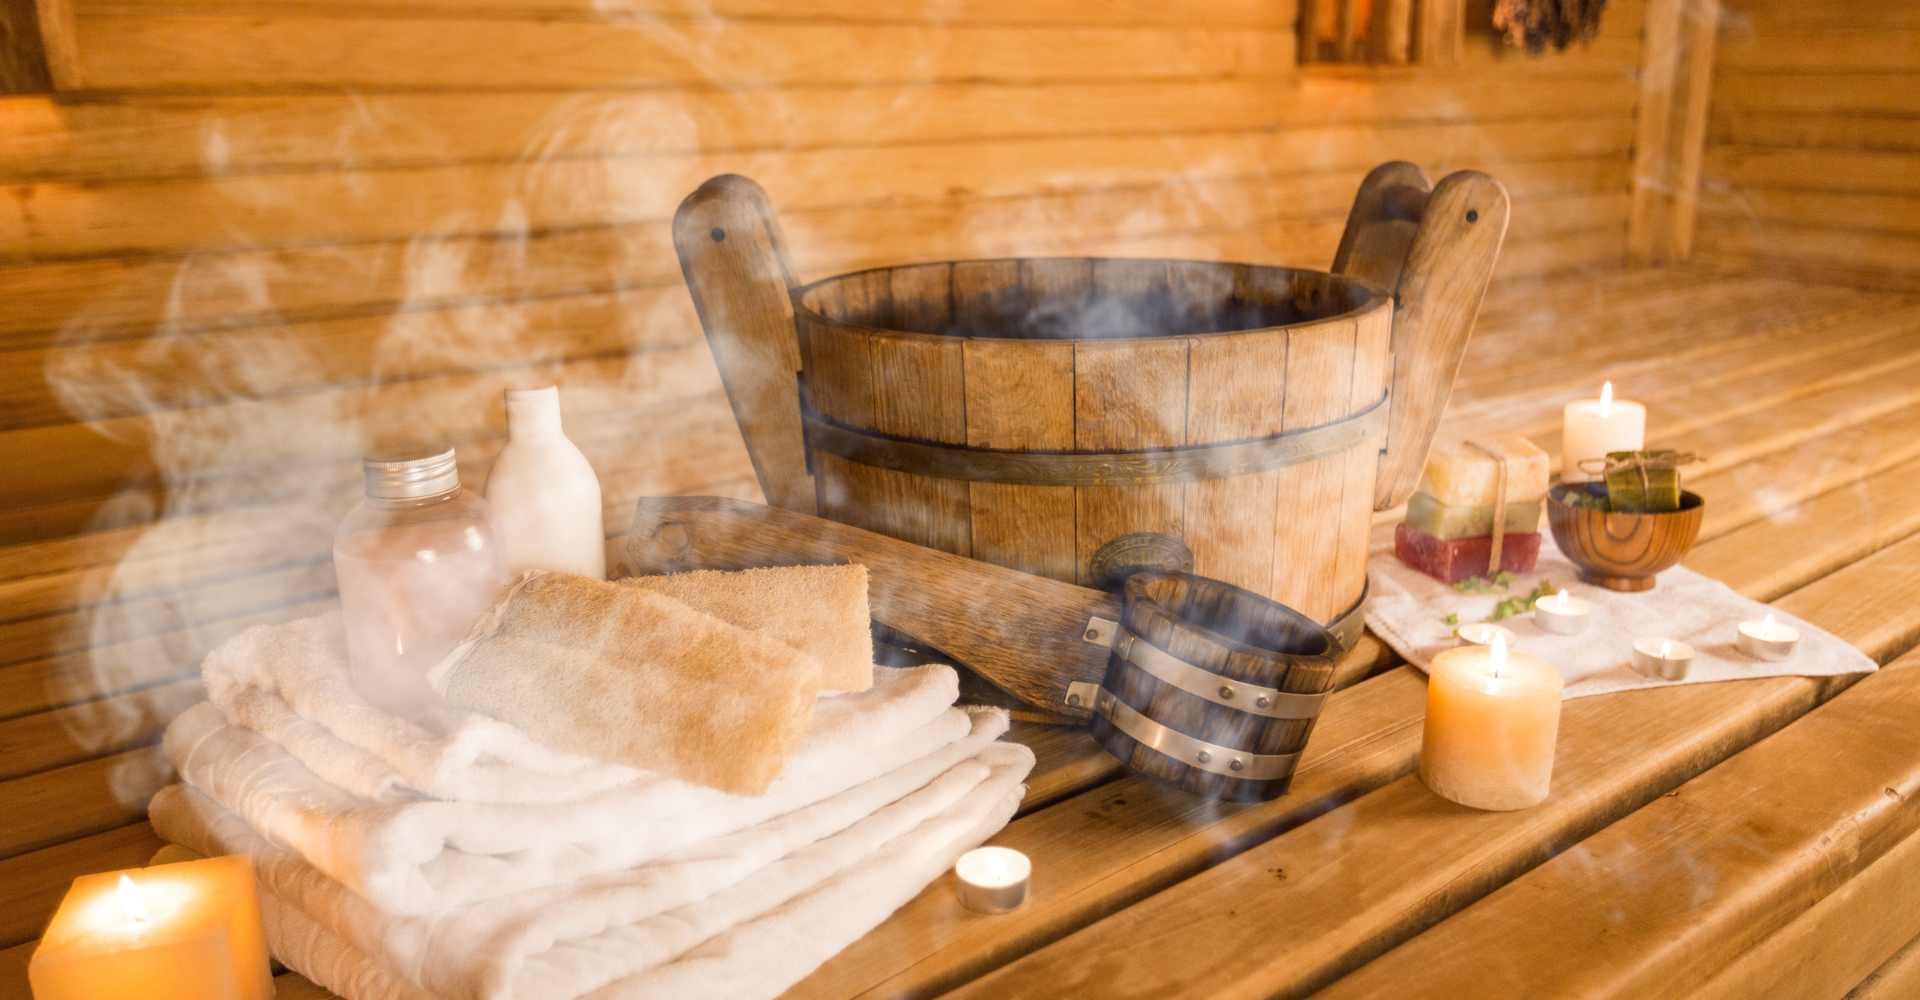 Can Saunas Really Help with Acne? A Comprehensive Guide to Sauna as an Acne Treatment